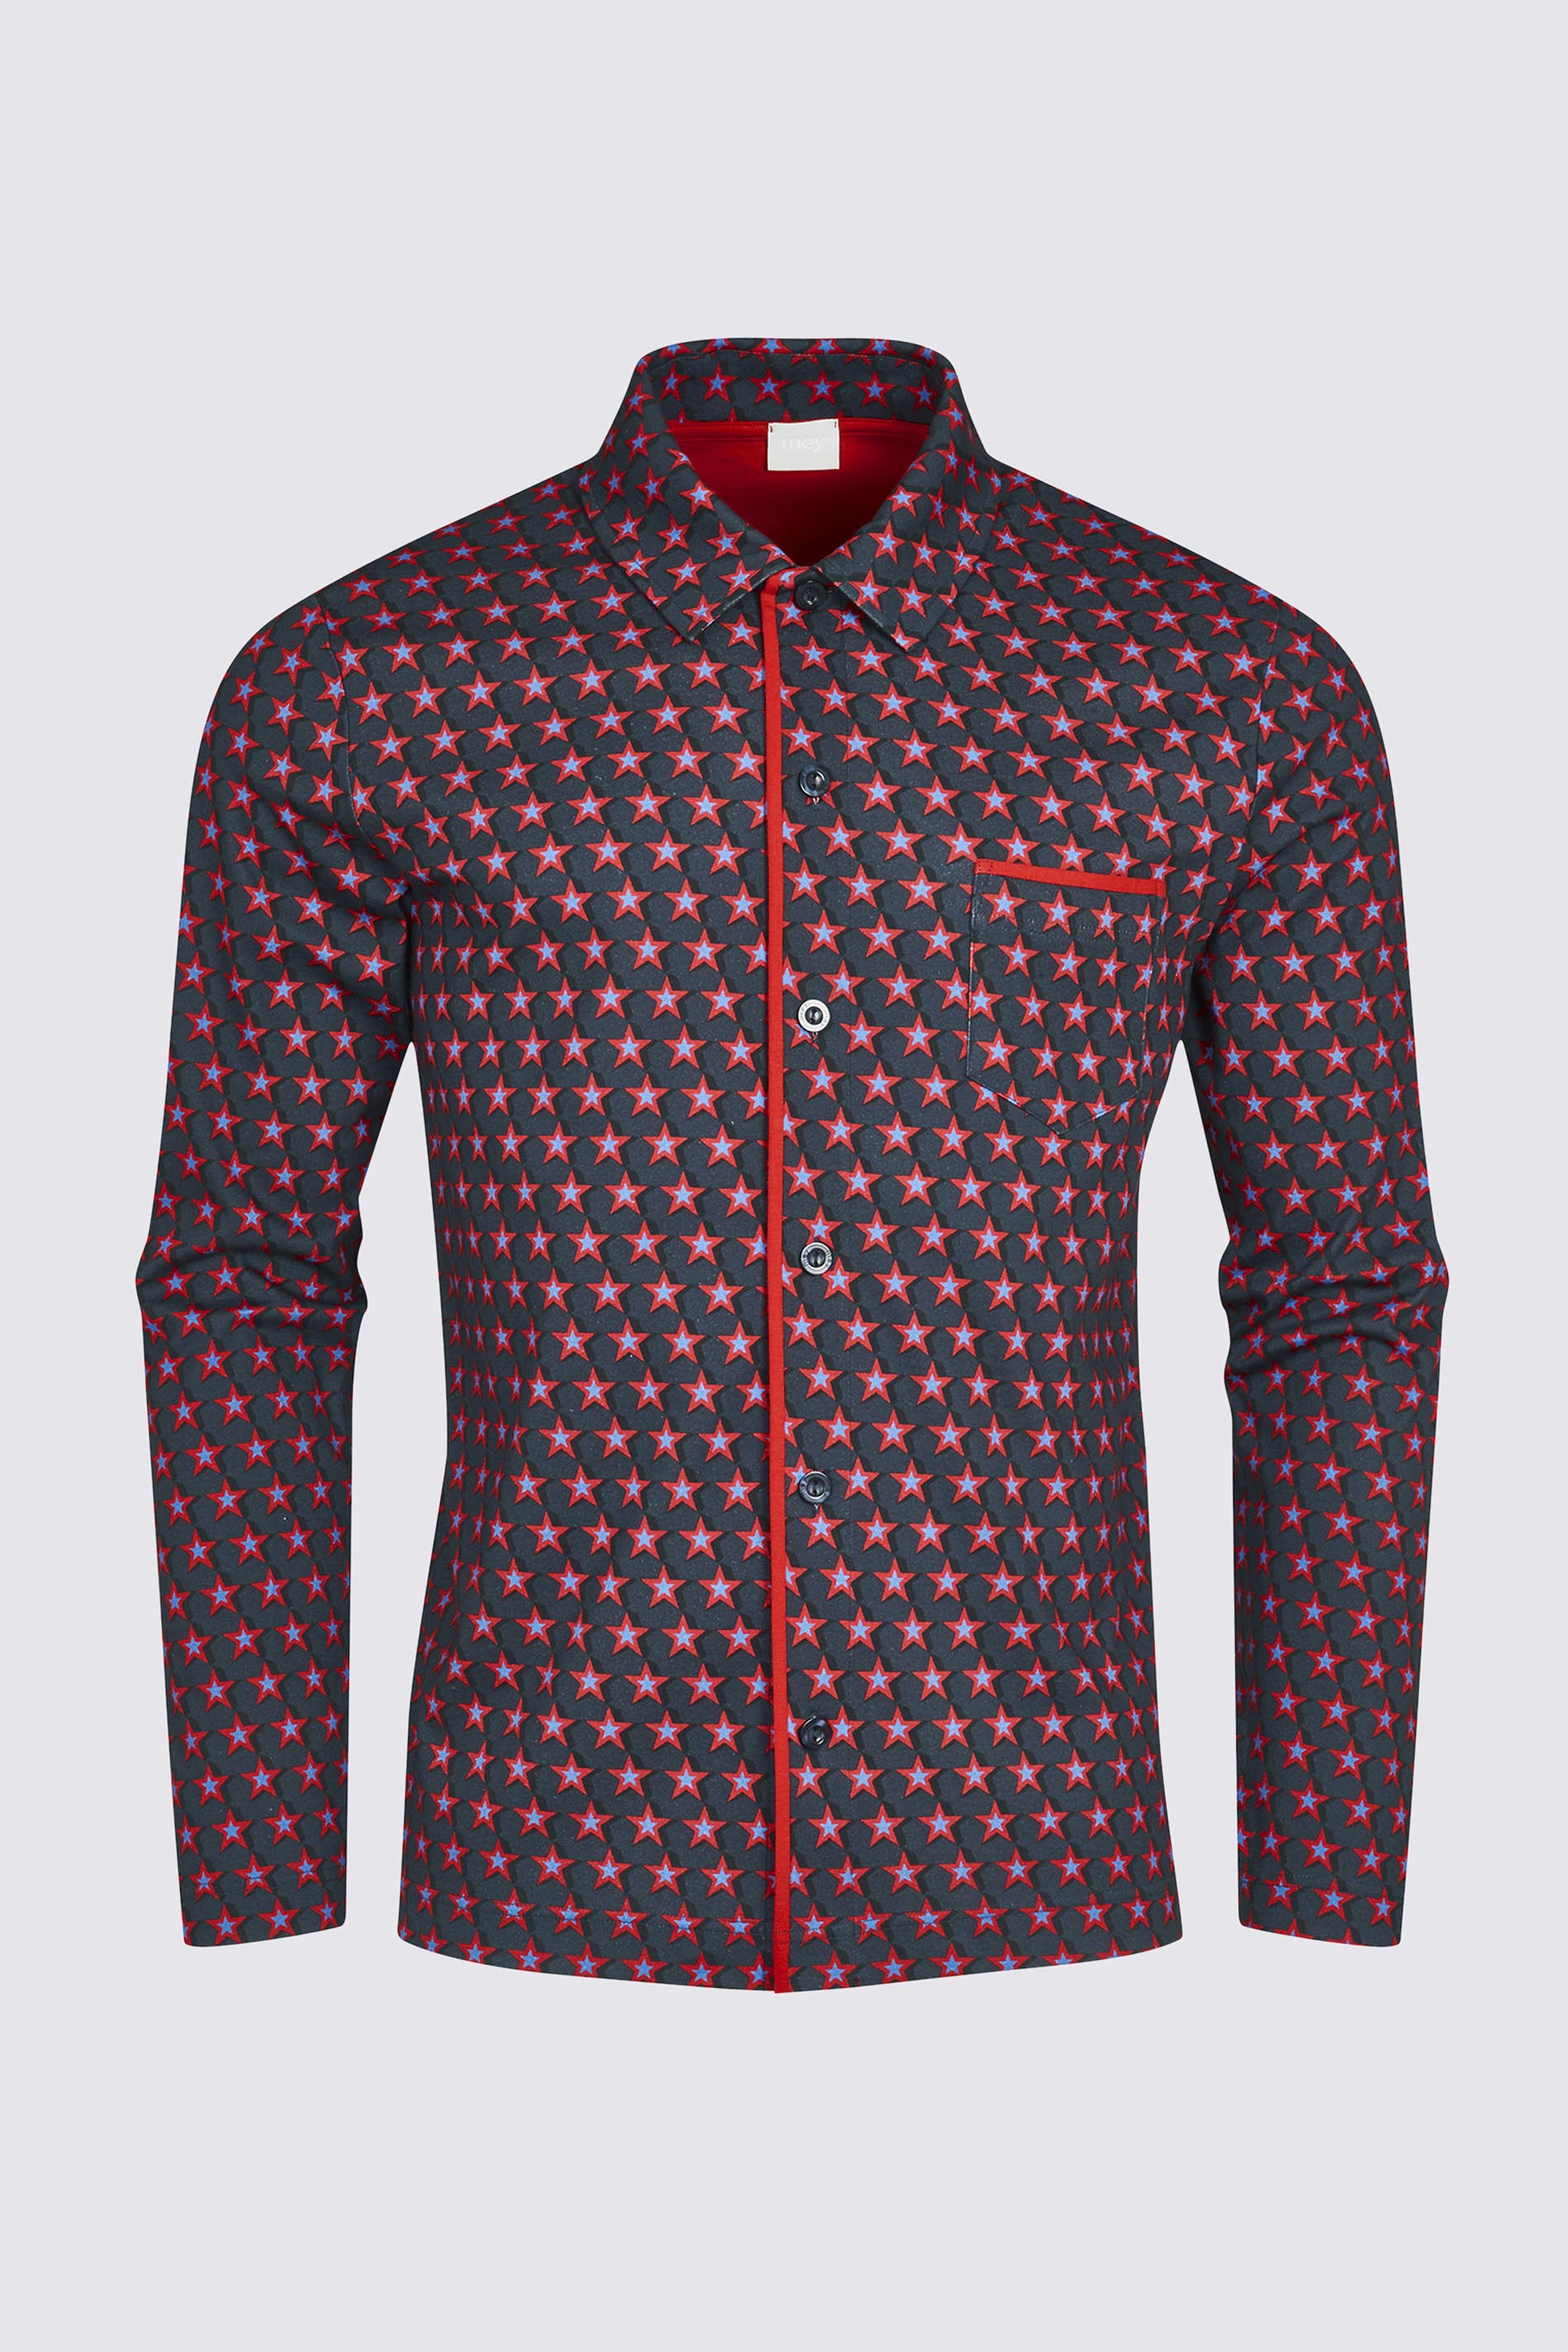 Pyjamatop Fire Red Serie RE:THINK STAR Uitknippen | mey®